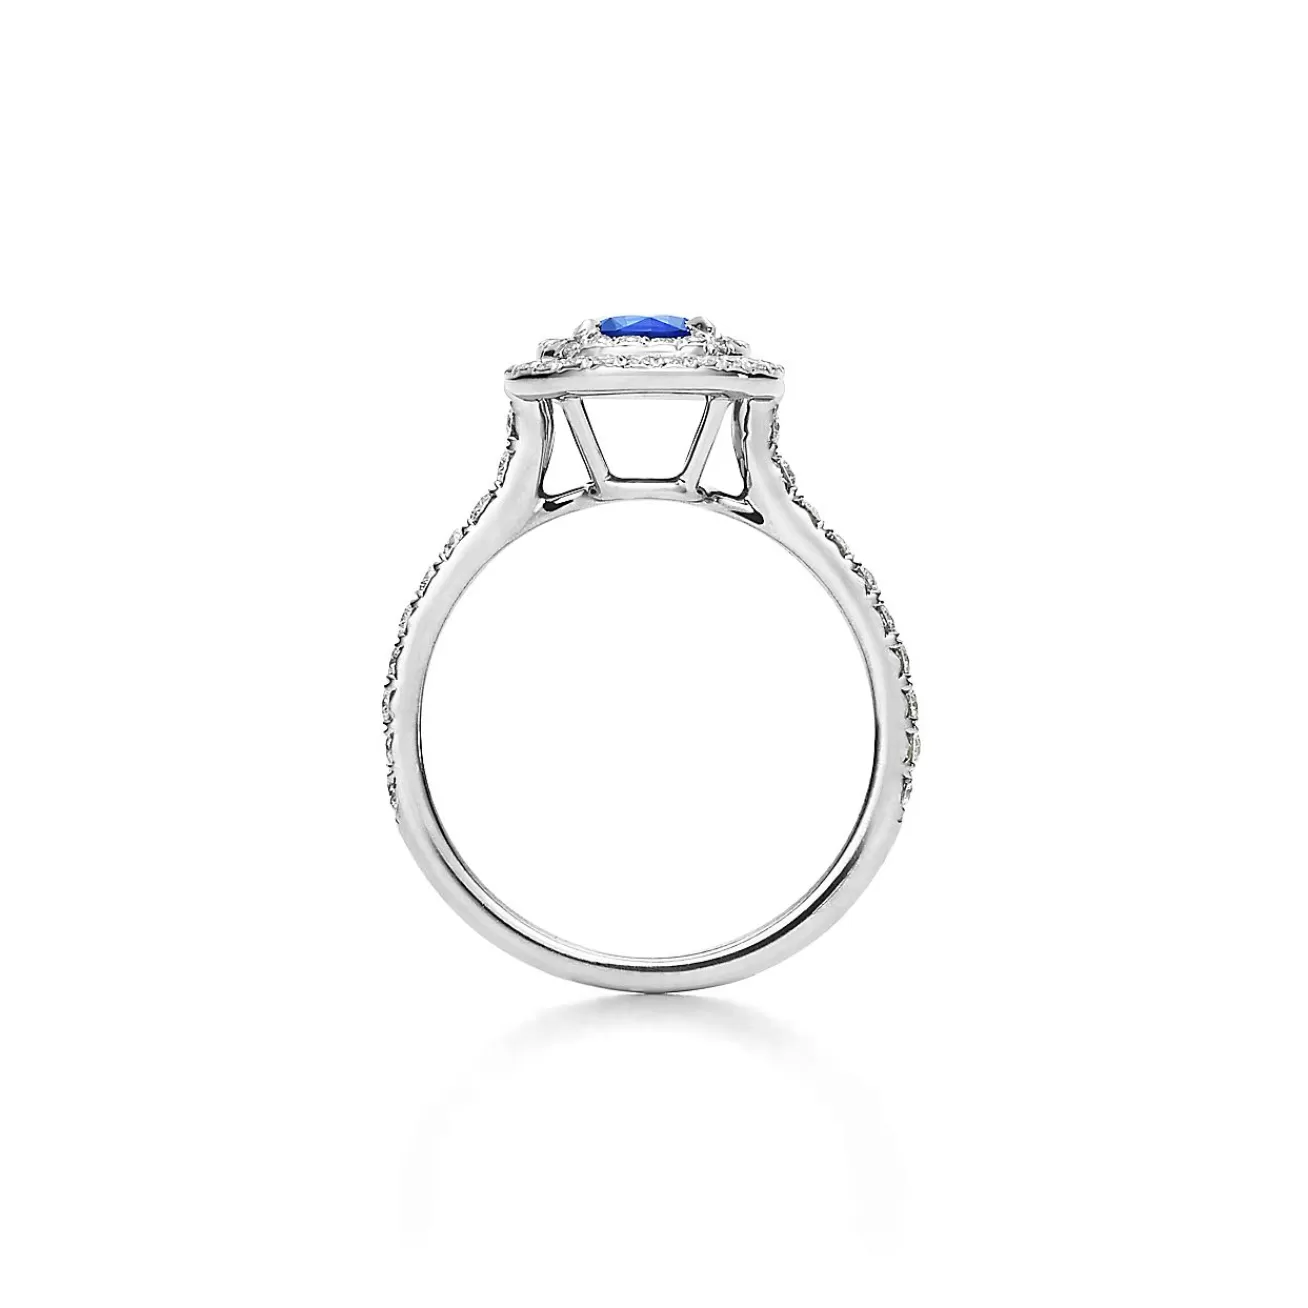 Tiffany & Co. Tiffany Soleste® ring in platinum with a .45-carat sapphire and diamonds. | ^ Rings | Platinum Jewelry